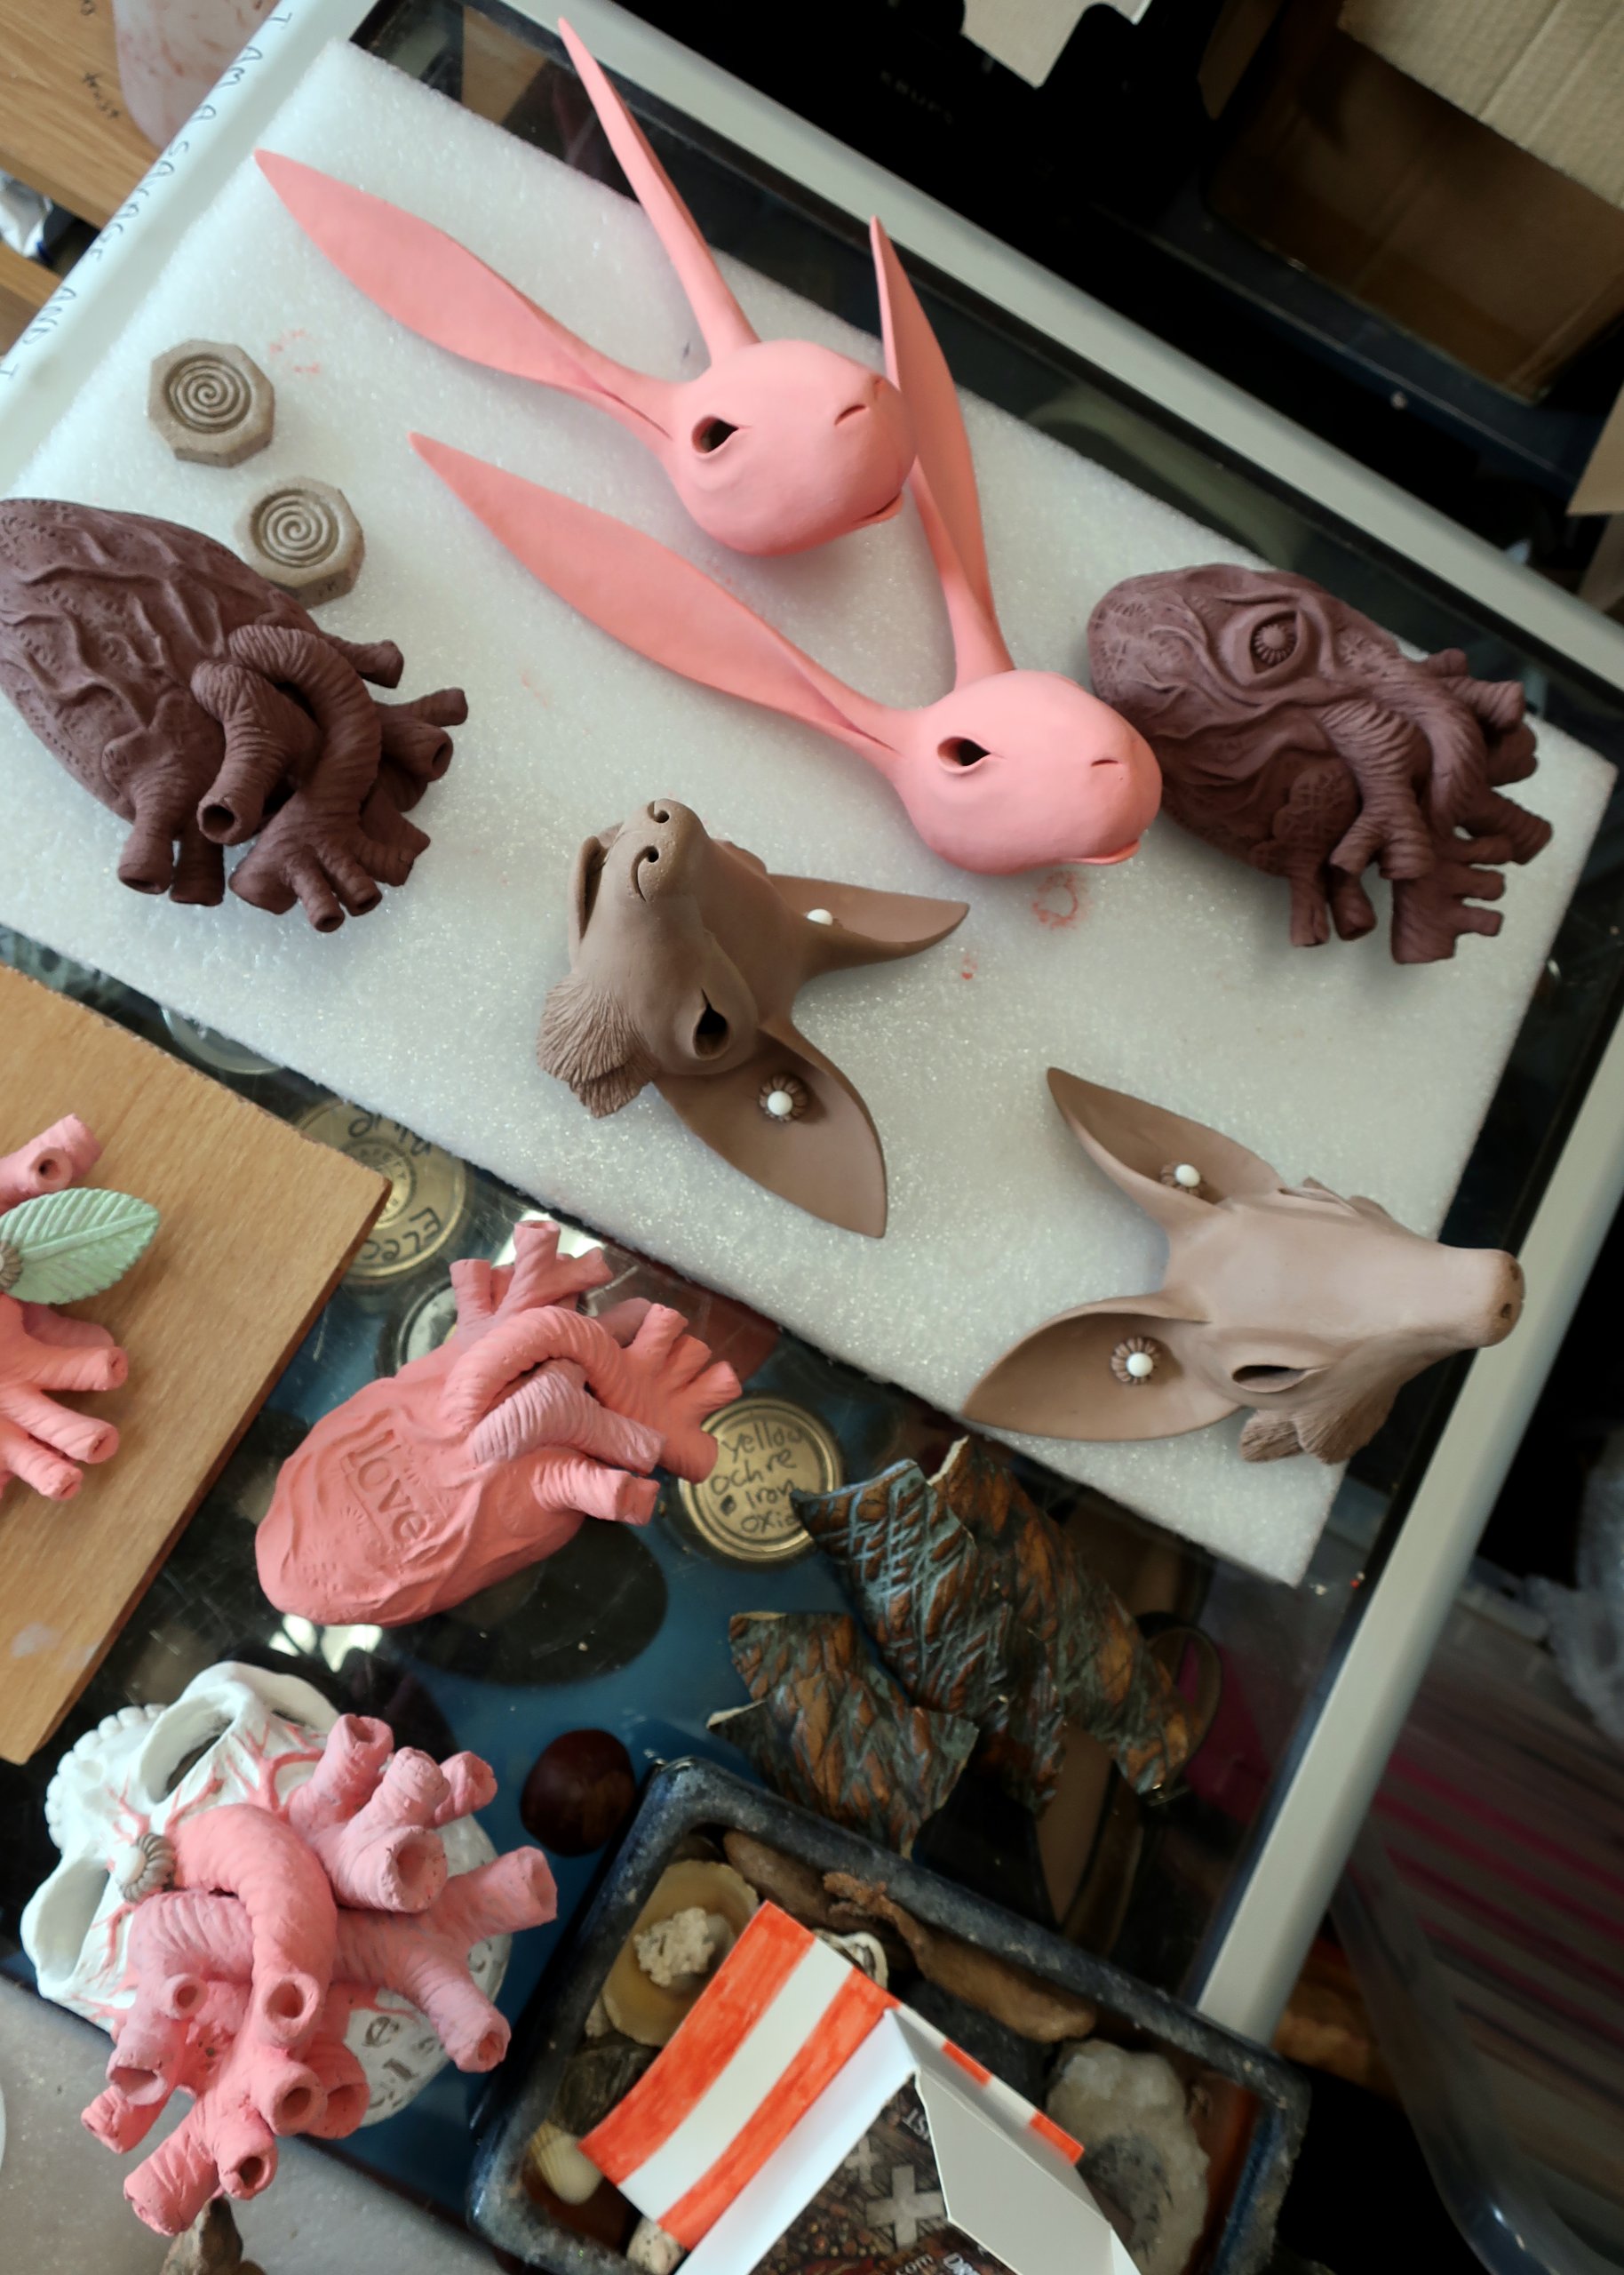 Ceramic pink hare heads, brown fox heads and ceramic hearts with flowers on by Drew Caines, placed on a trolly.